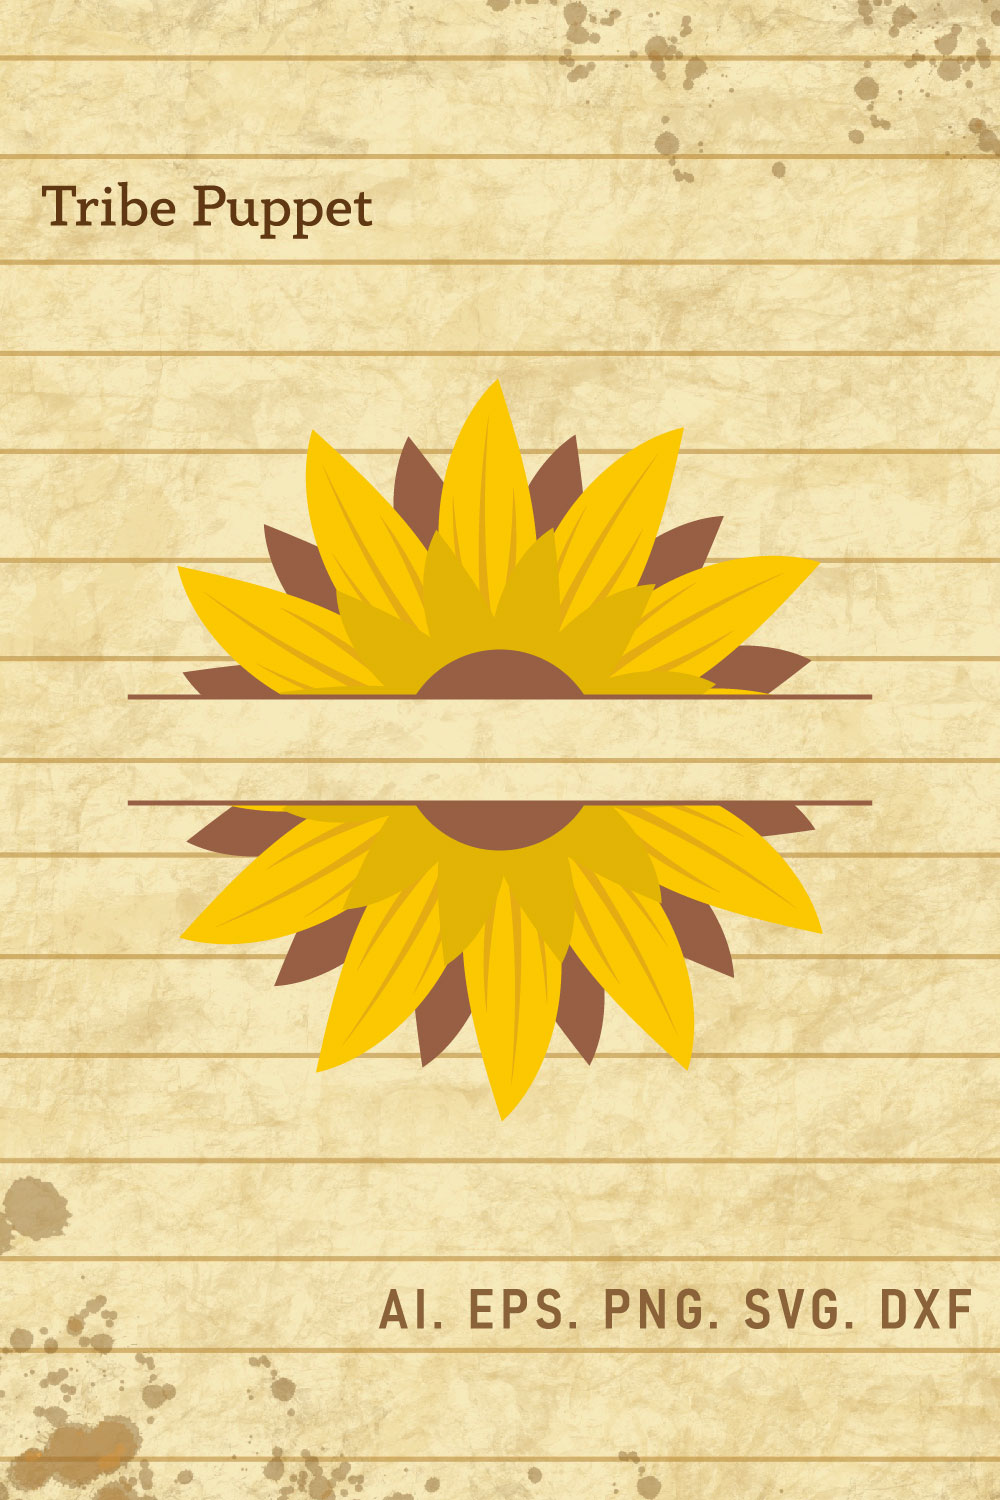 Sunflower 20 pinterest preview image.